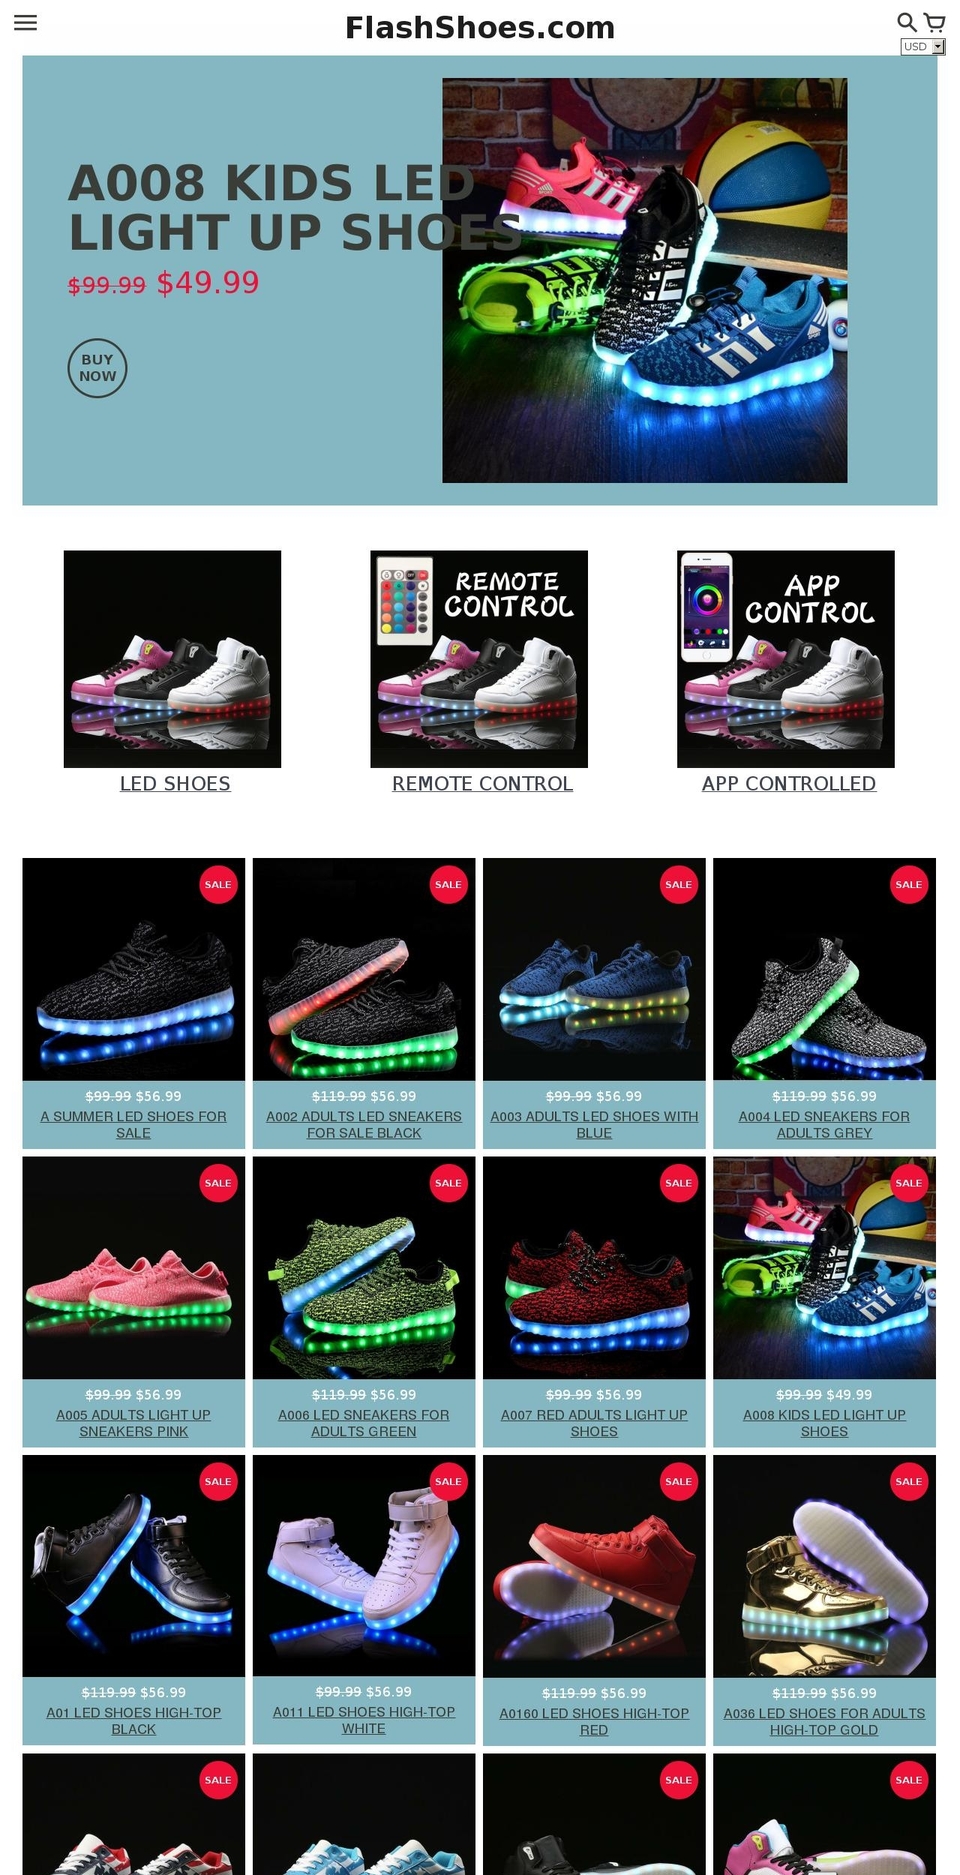 Colors Shopify theme site example googlesneakers.com